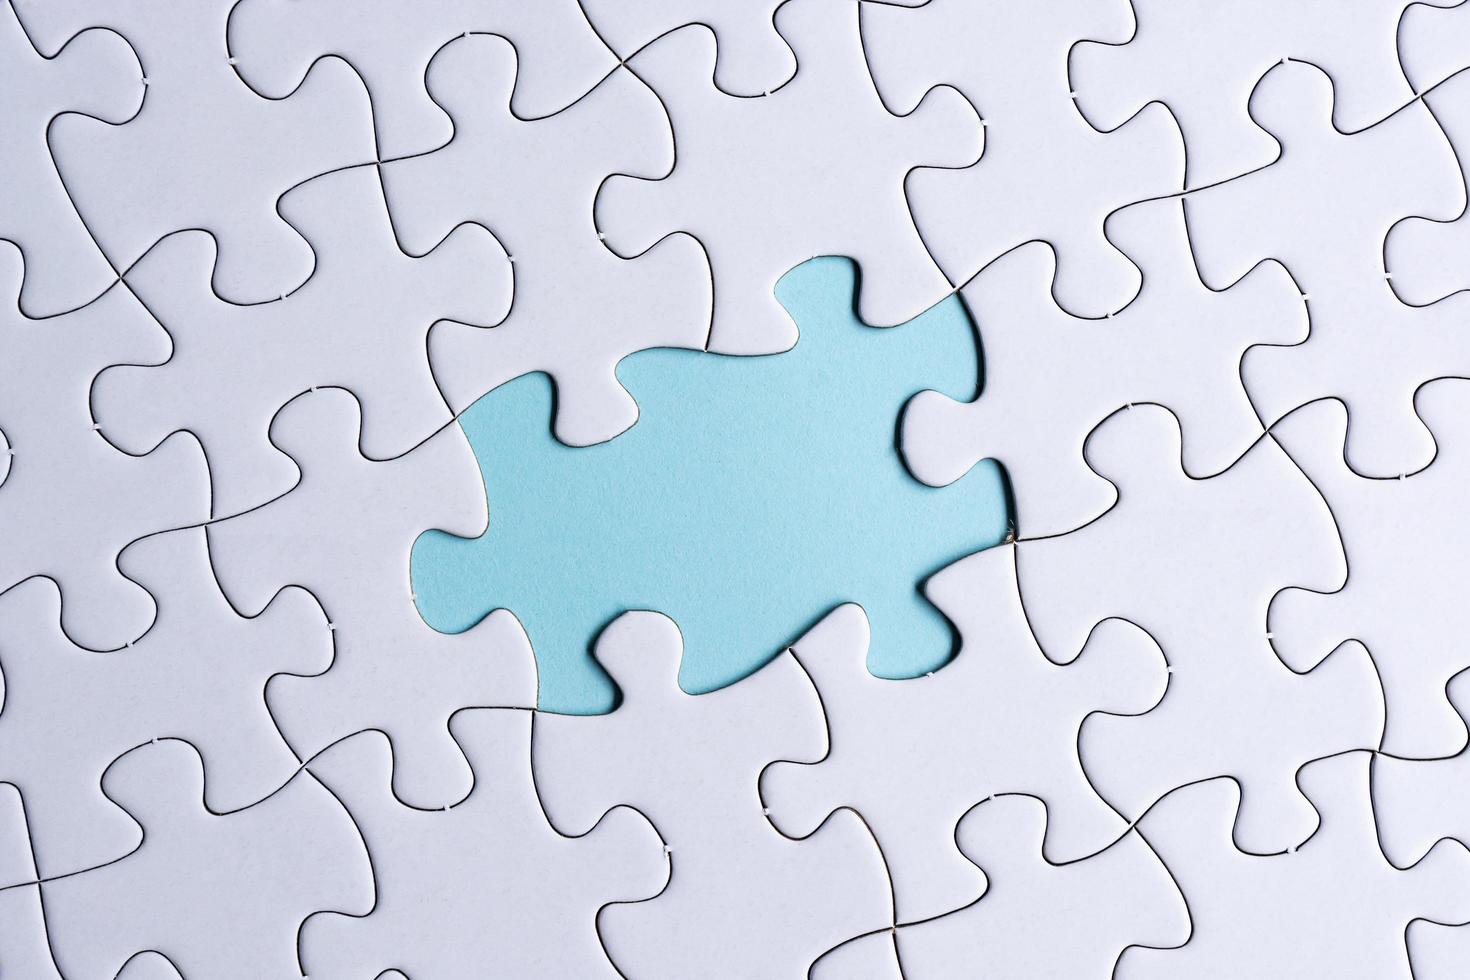 Piece of jigsaw puzzle on blue paper. Directly above. Copy space. photo